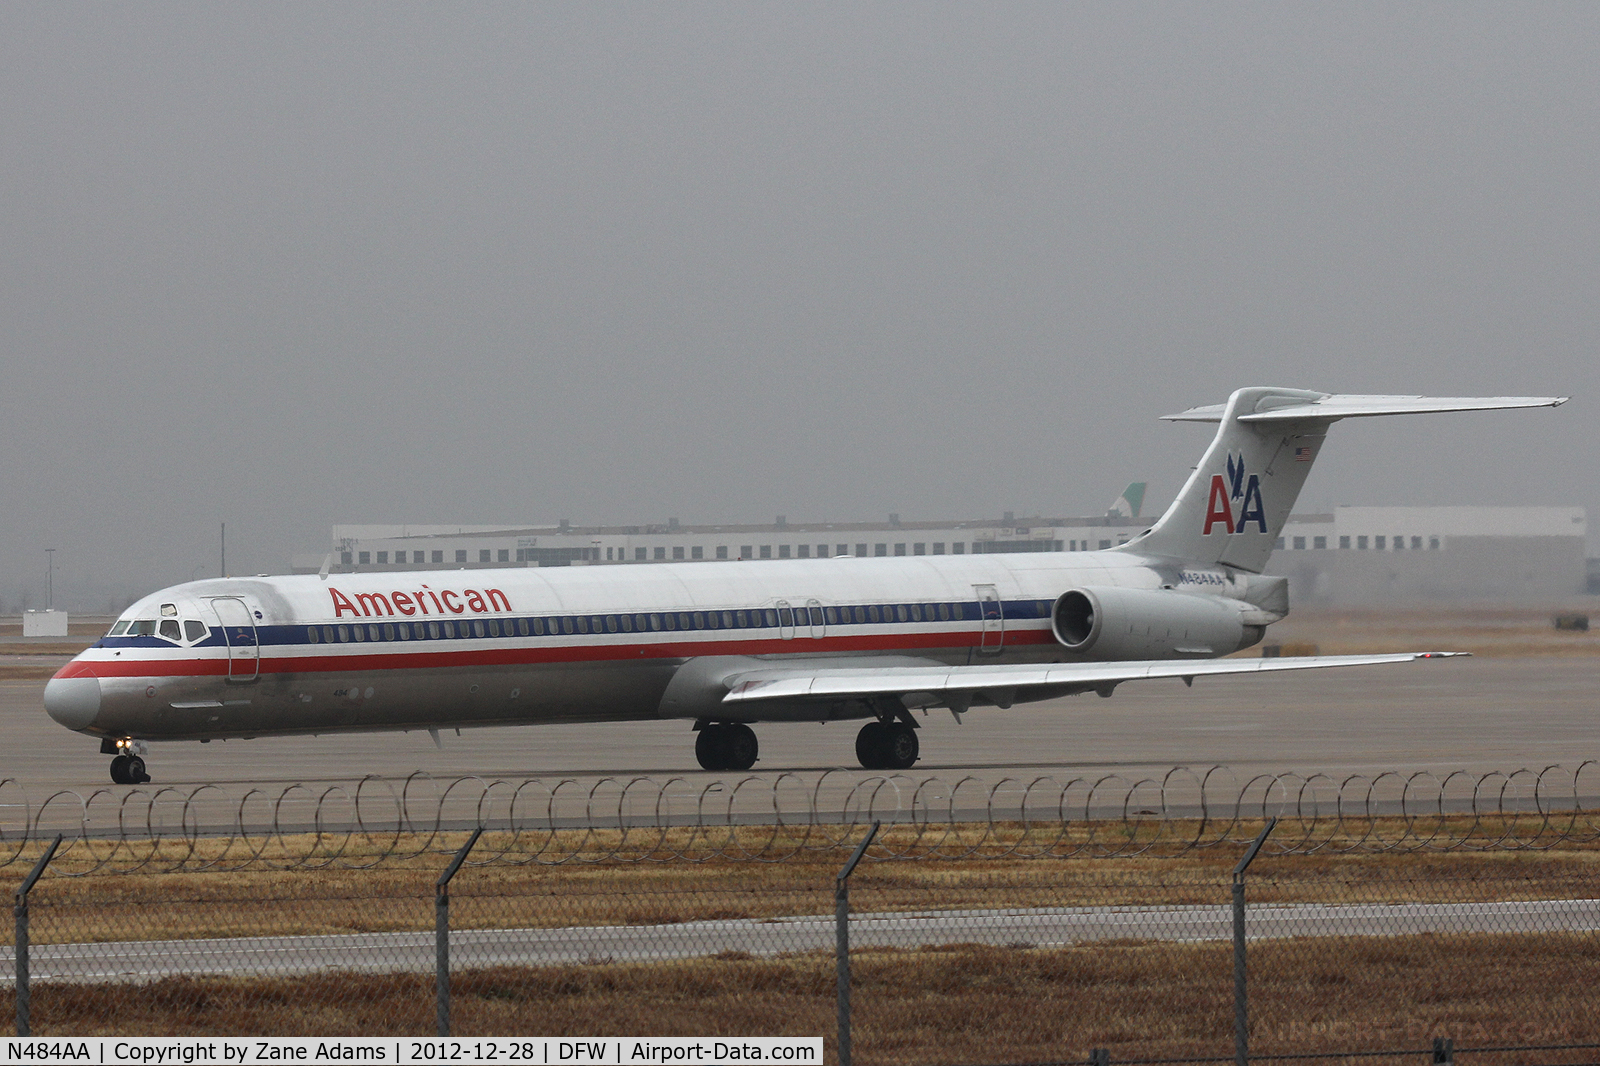 N484AA, 1988 McDonnell Douglas MD-82 (DC-9-82) C/N 49677, American Airlines at DFW Airport.